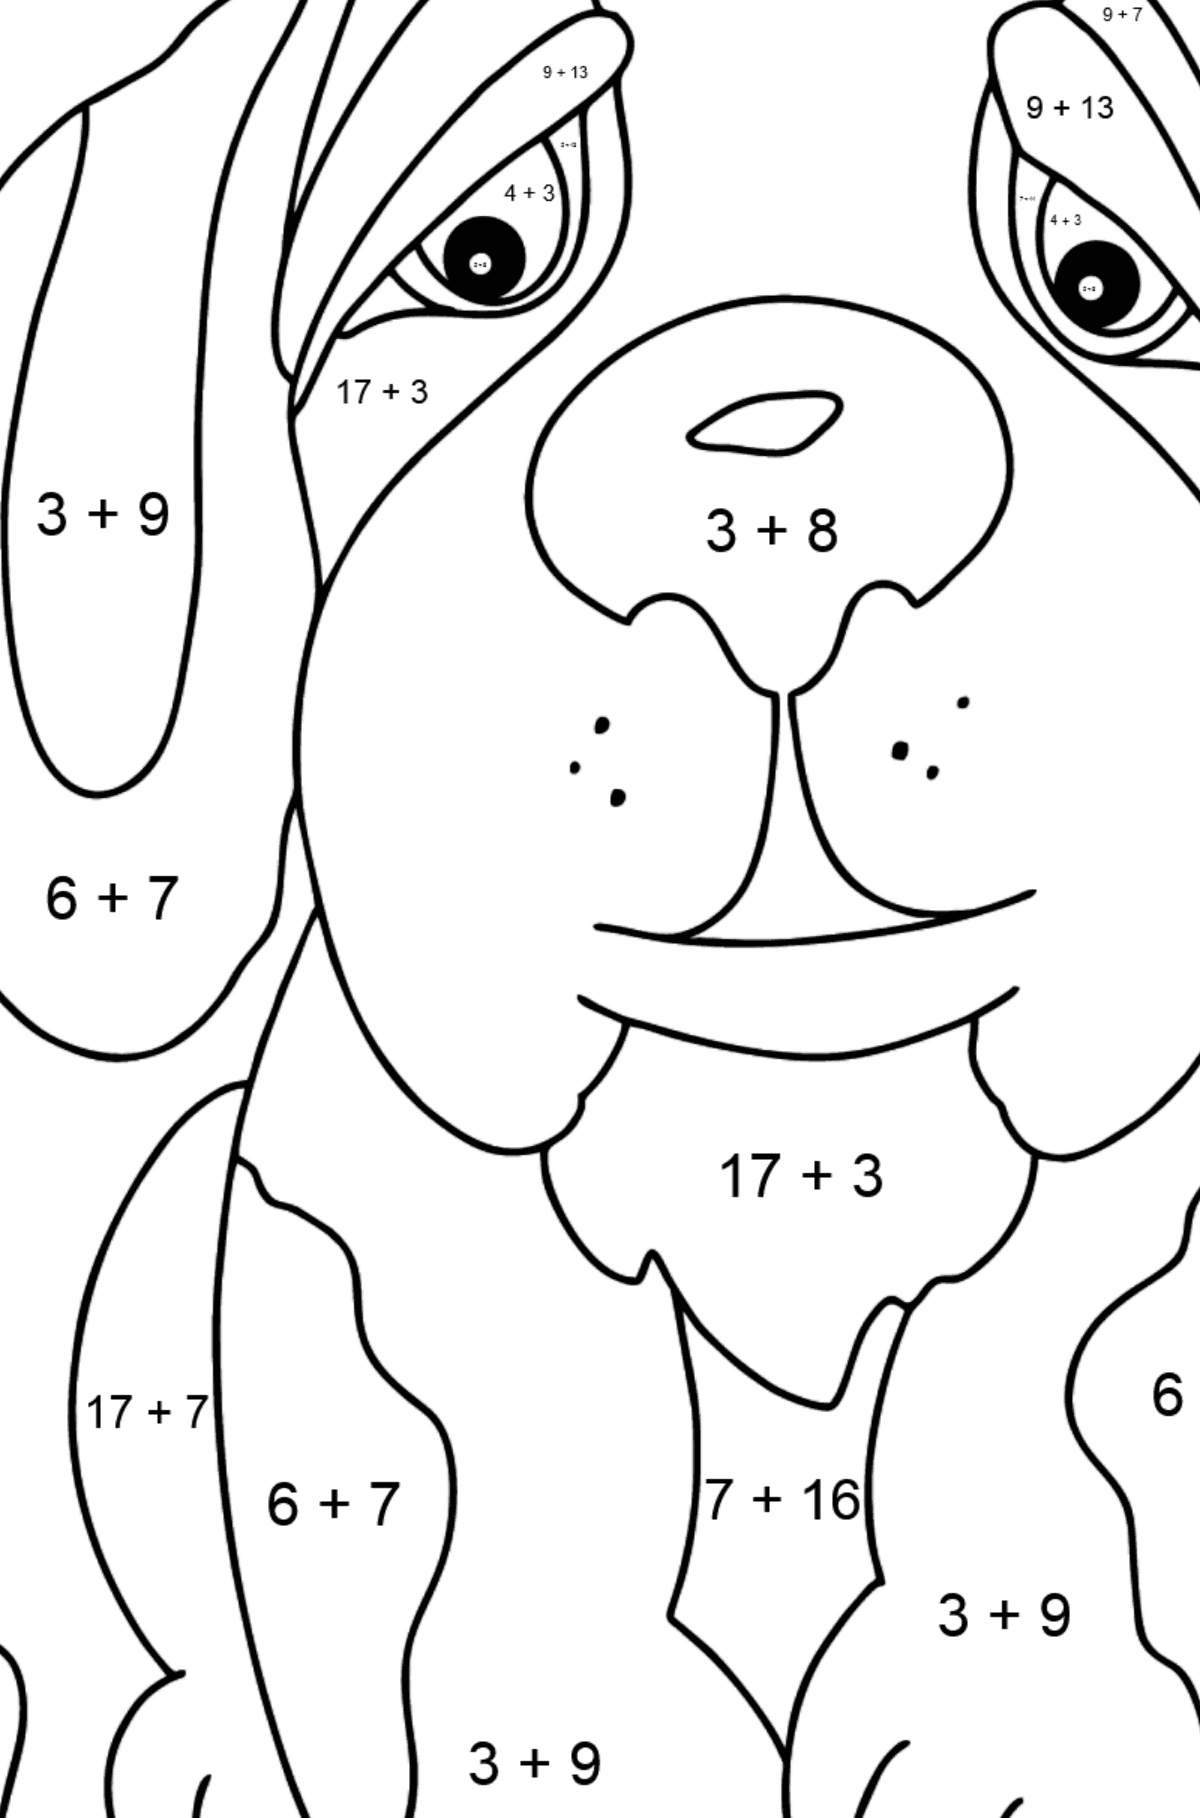 Coloring Page - A Dog is Watching a Butterfly - Math Coloring - Addition for Kids